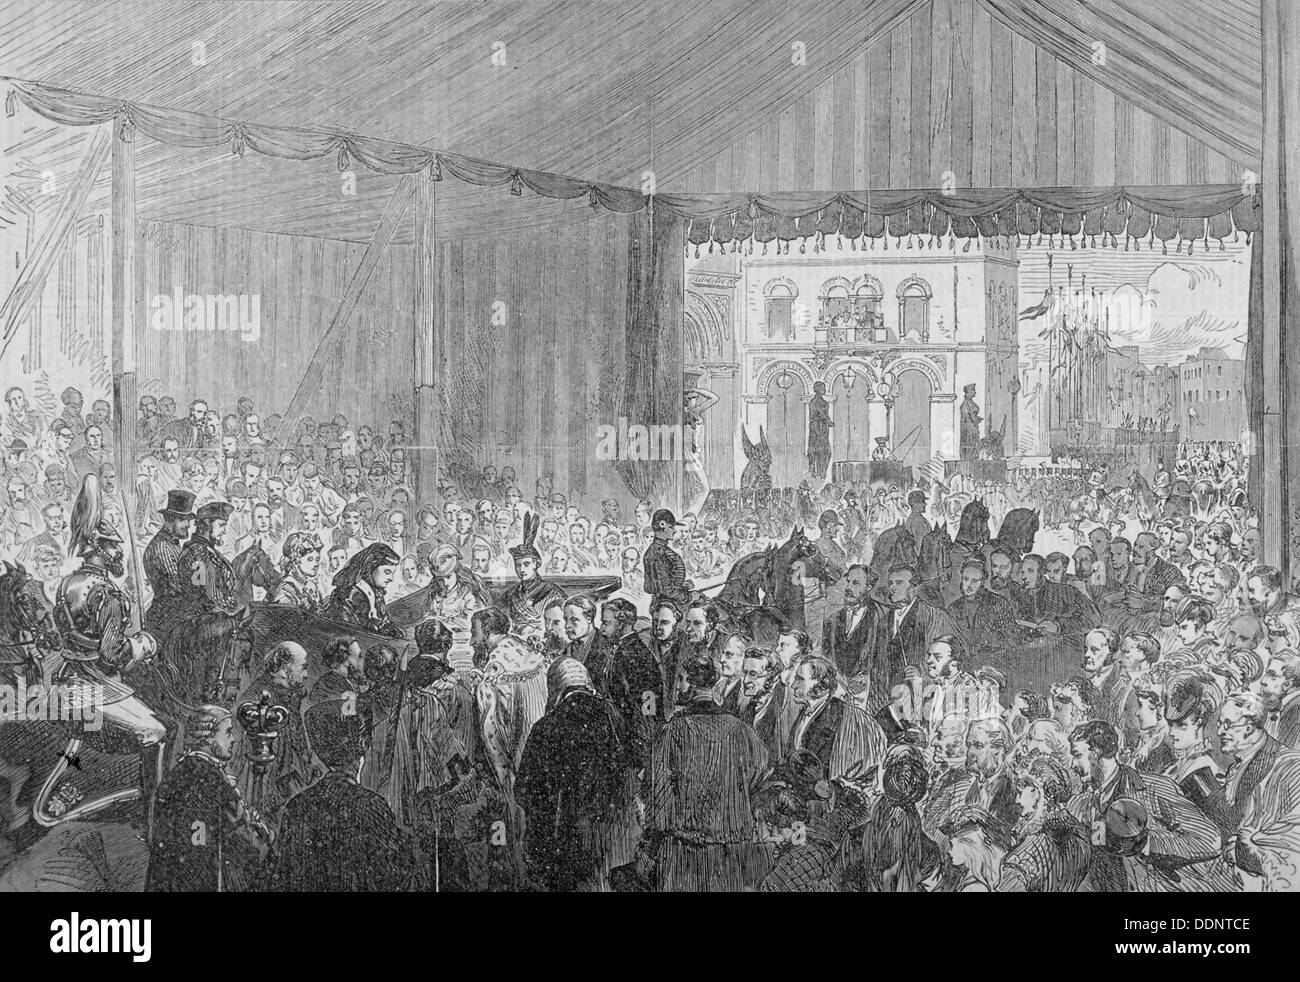 Royal opening of Holborn Viaduct, City of London, 1869.                                              Artist: Anon Stock Photo